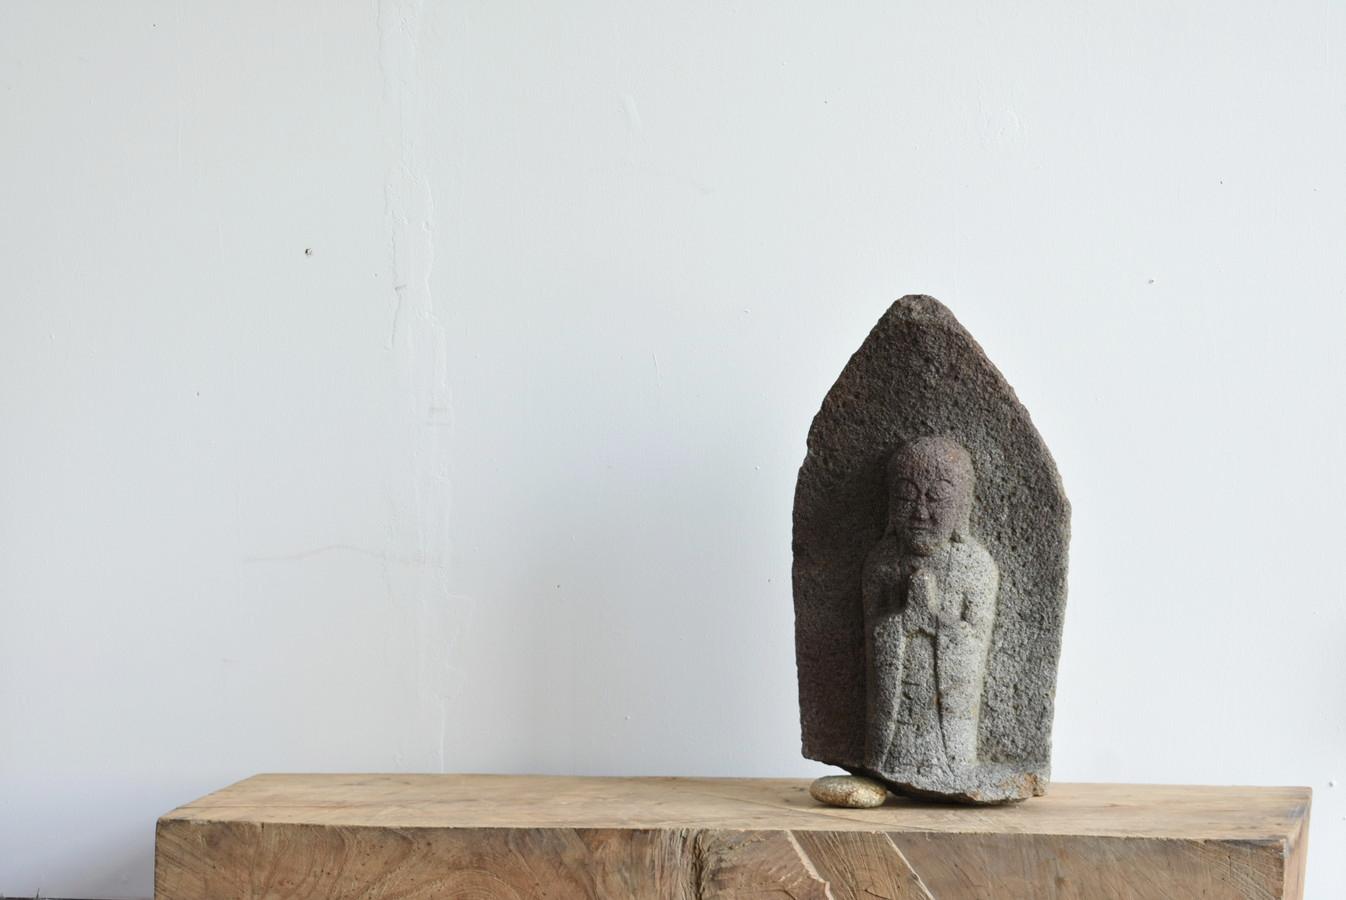 It is a stone Buddha statue of the Edo period (1700s) in Japan made of andesite.
This is the Jizo Bodhisattva who has joined hands.
Jizo is one of the bodhisattvas in the world of Buddhism.
It is the one who saves the people of the world with an